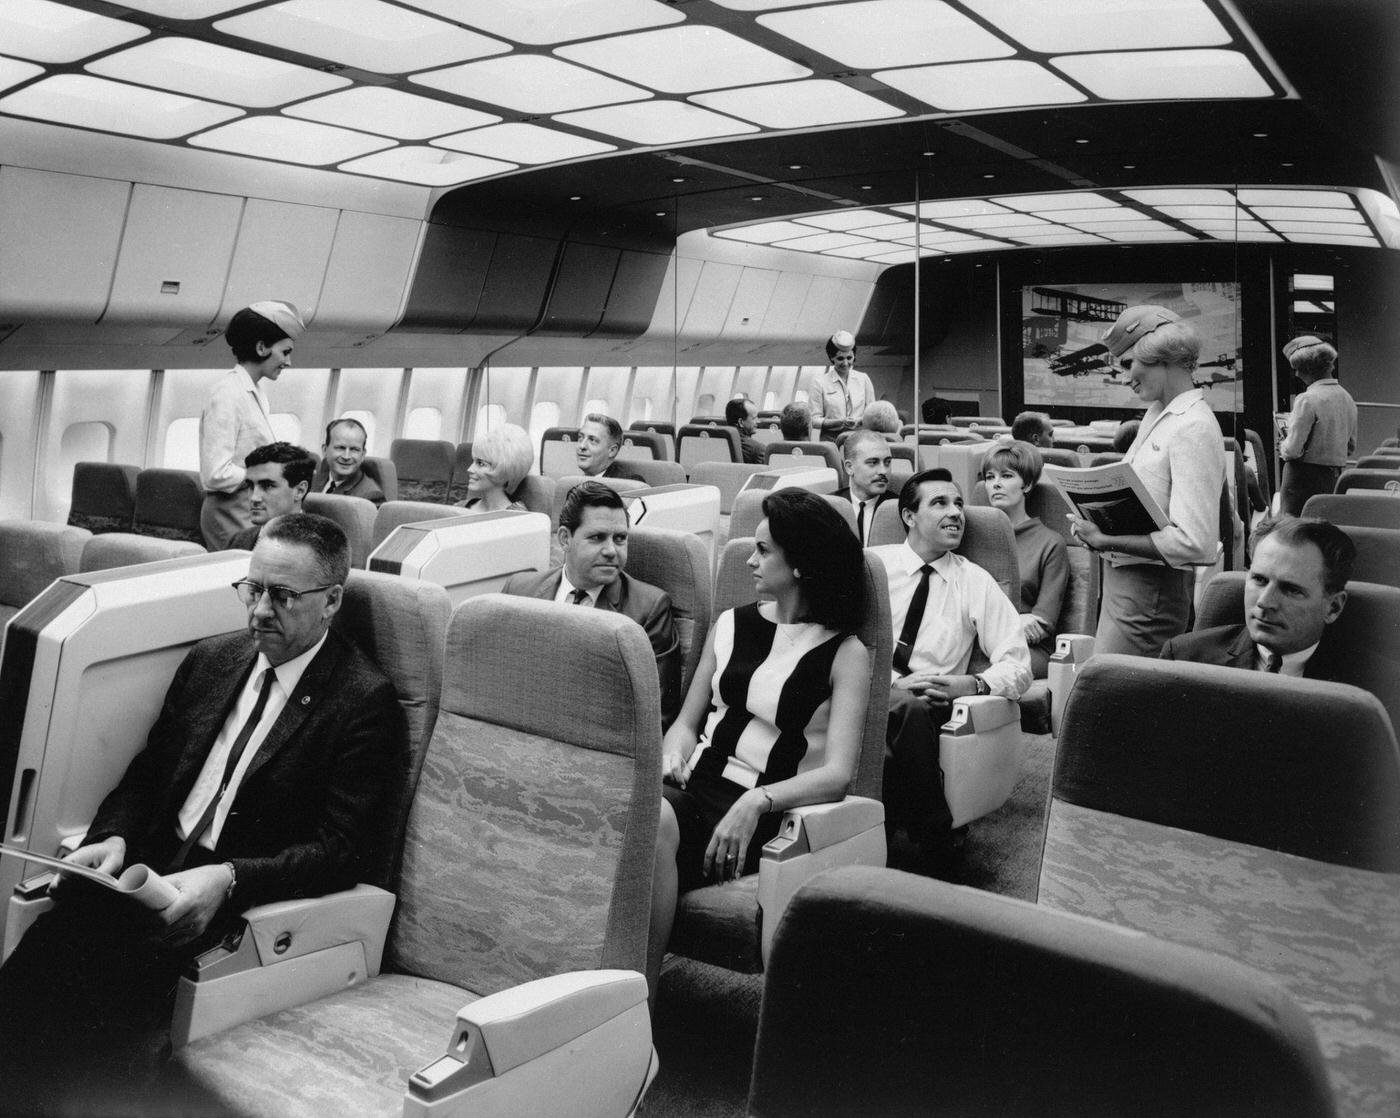 Passengers aboard a spacious Lockheed L-1011 TriStar jetliner mock-up, which provides each passenger with seven square feet of space, almost 17% more than the largest transport flying at the time, in Los Angeles, California in the 1960s.